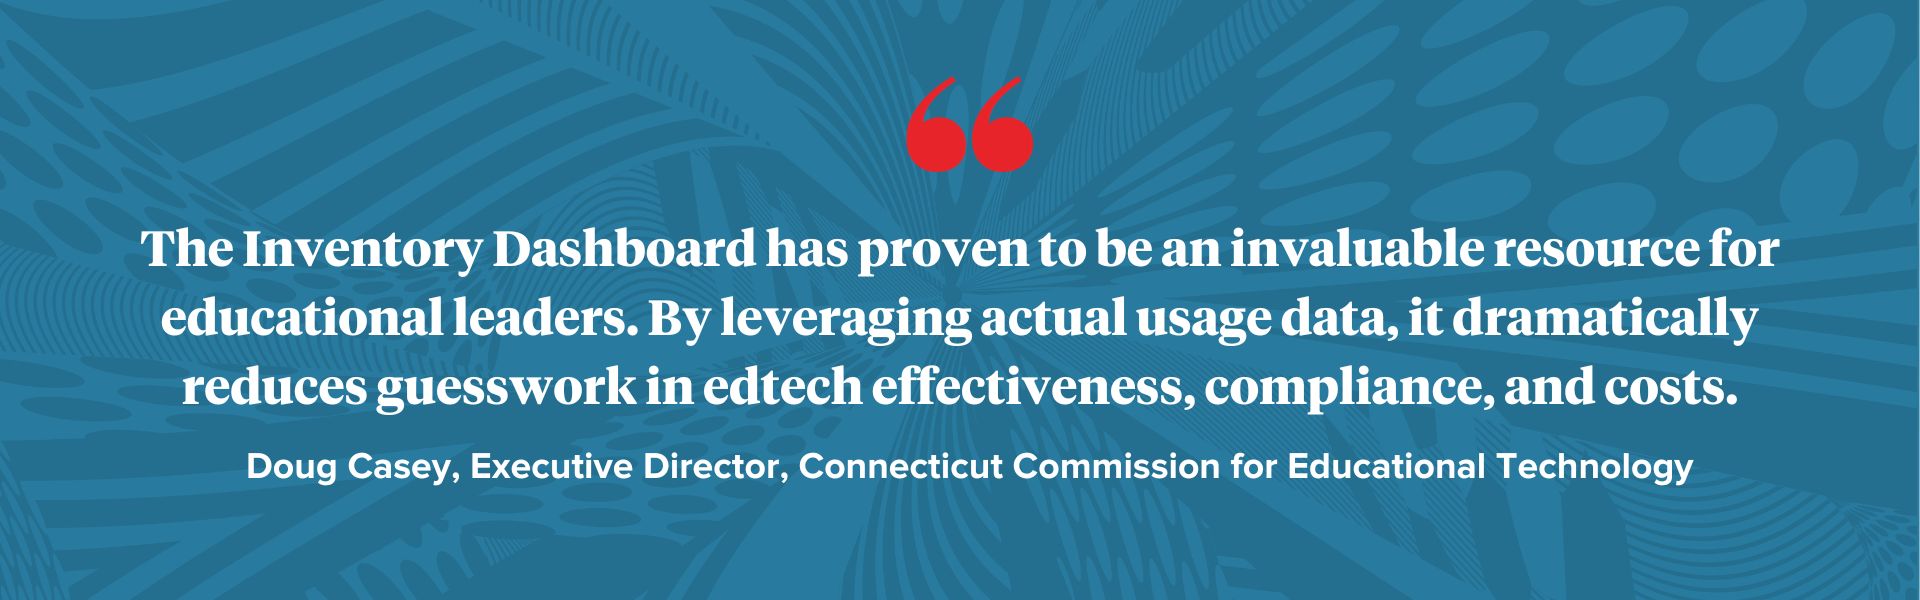 The Inventory Dashboard has proven to be an invaluable resource for educational leaders. By leveraging actual usage data, it dramatically reduces guesswork in edtech effectiveness, compliance, and costs. -Doug Casey, Executive Director, Connecticut Commission for Educational Technology